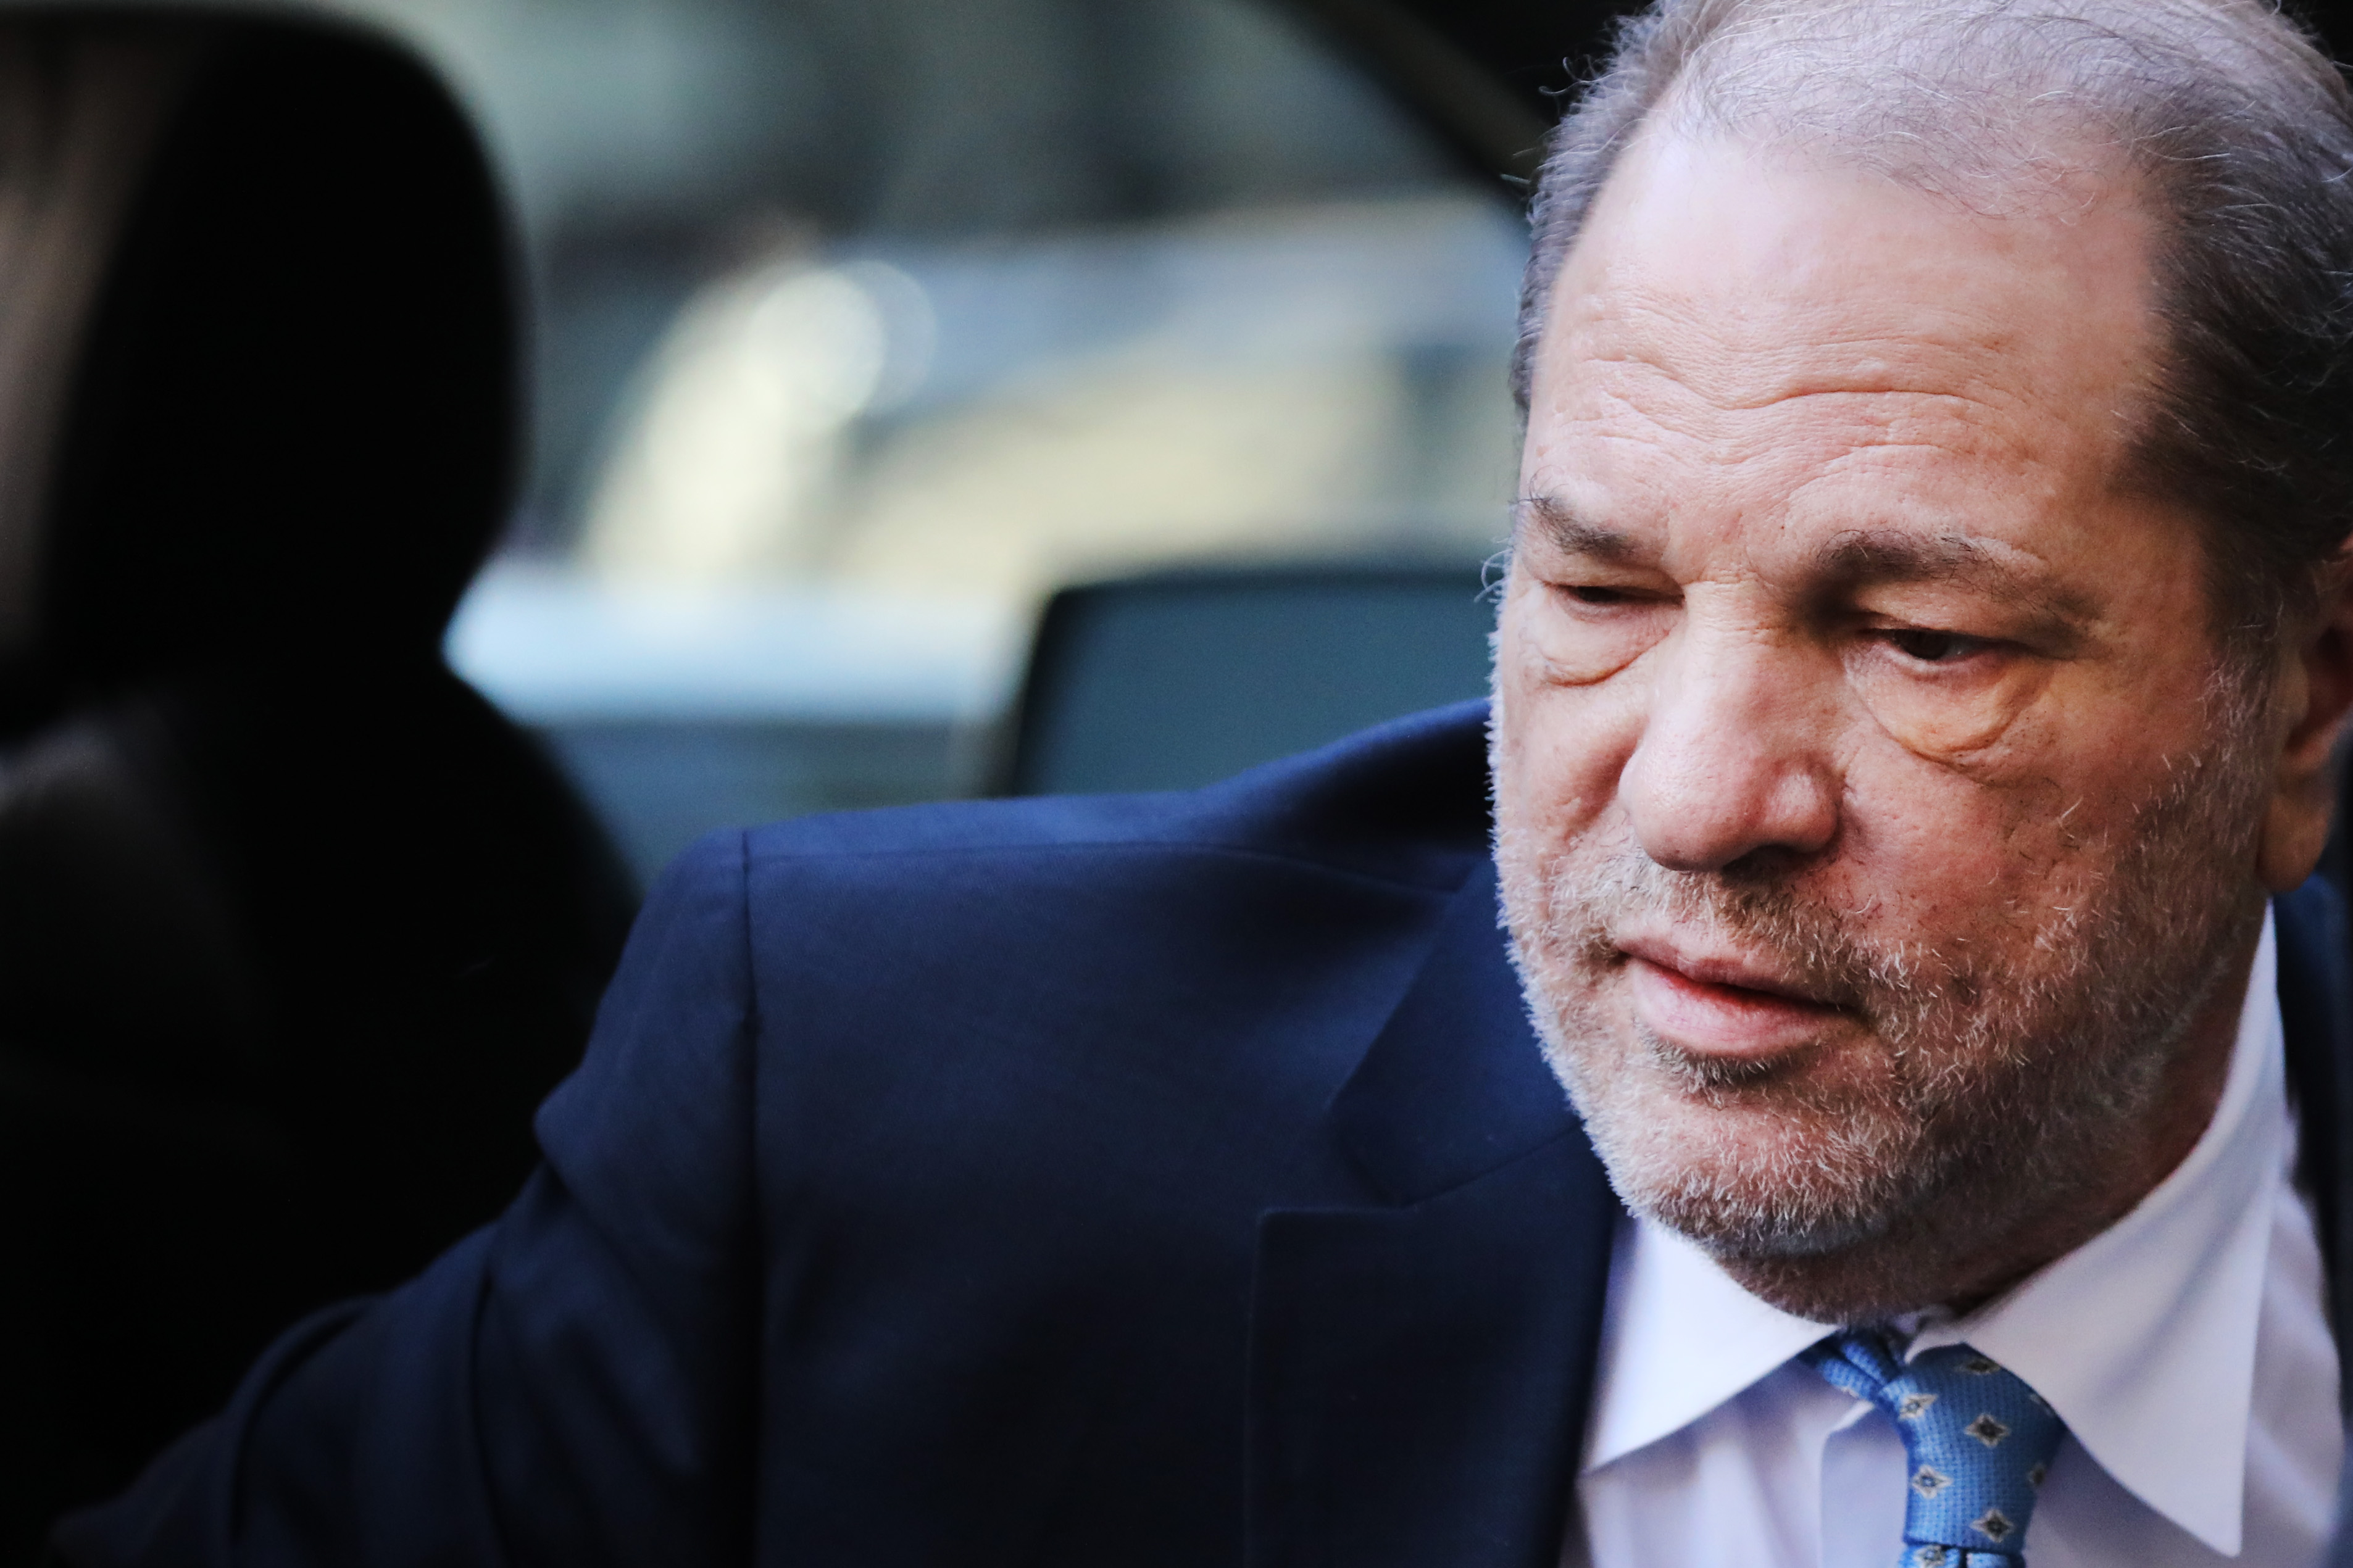 Harvey Weinstein entering a court house February 24, 2020, in New York. | Source: Getty Images